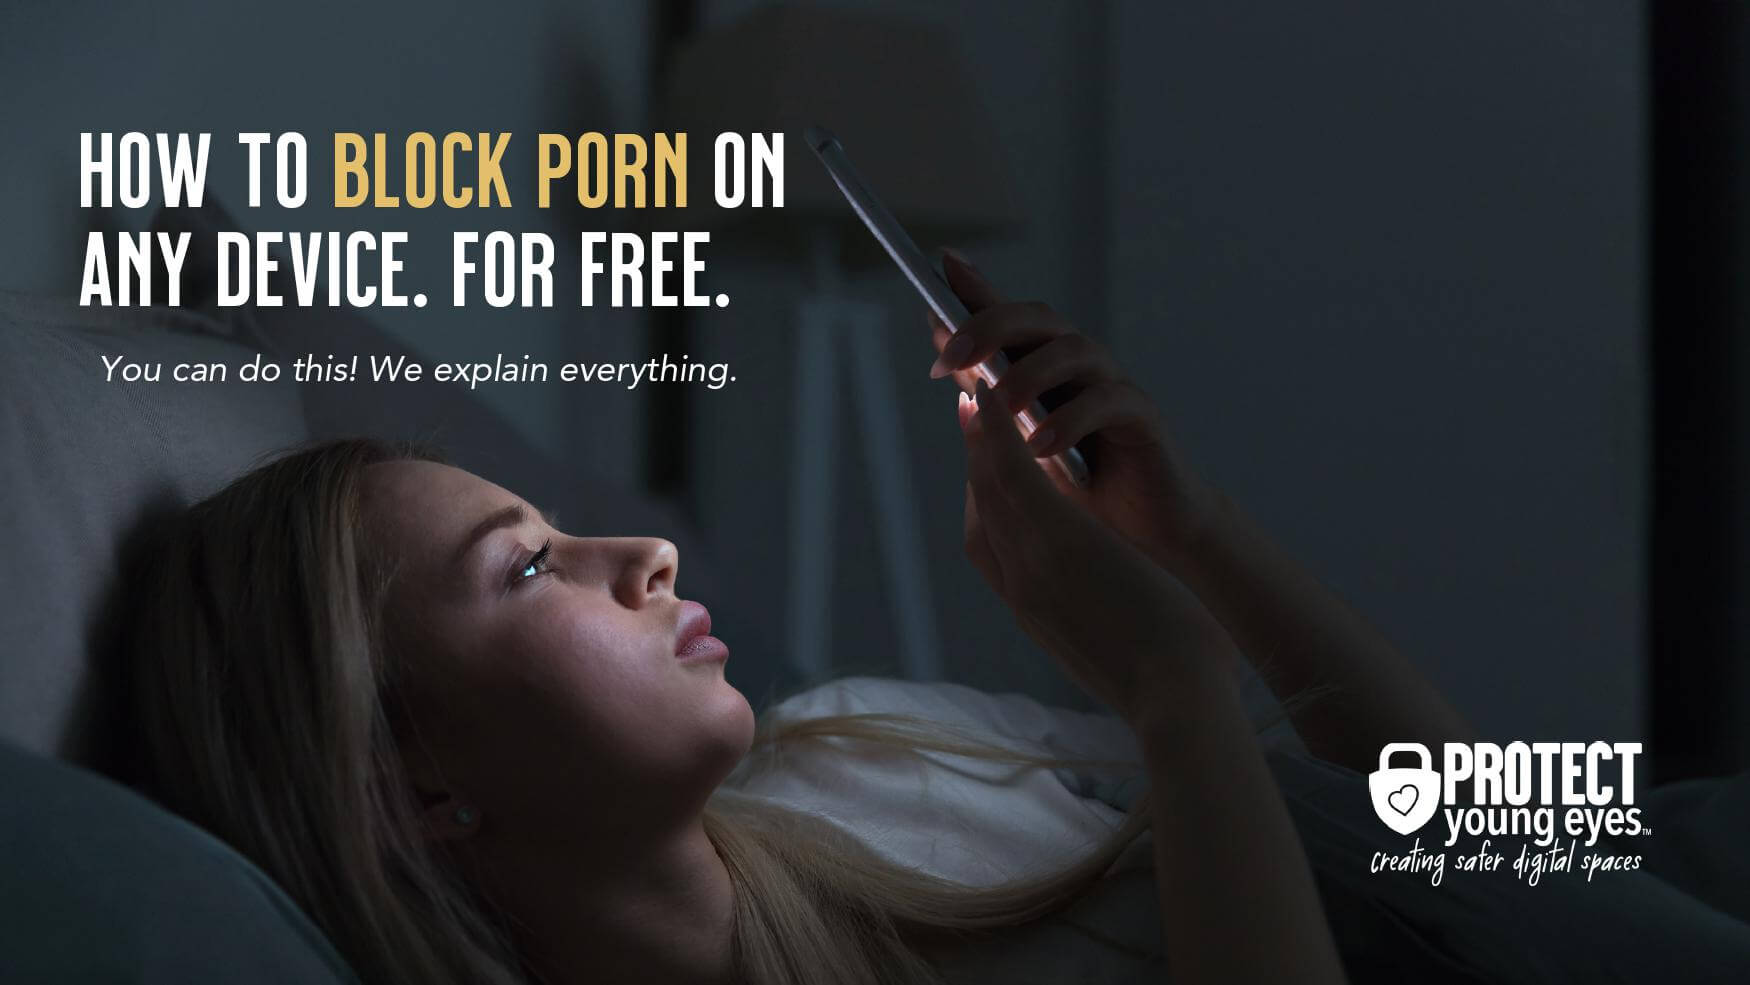 Xxx Bf Vdo 16 Yairs - How to Block Porn on Any Device. For Free. - Protect Young Eyes